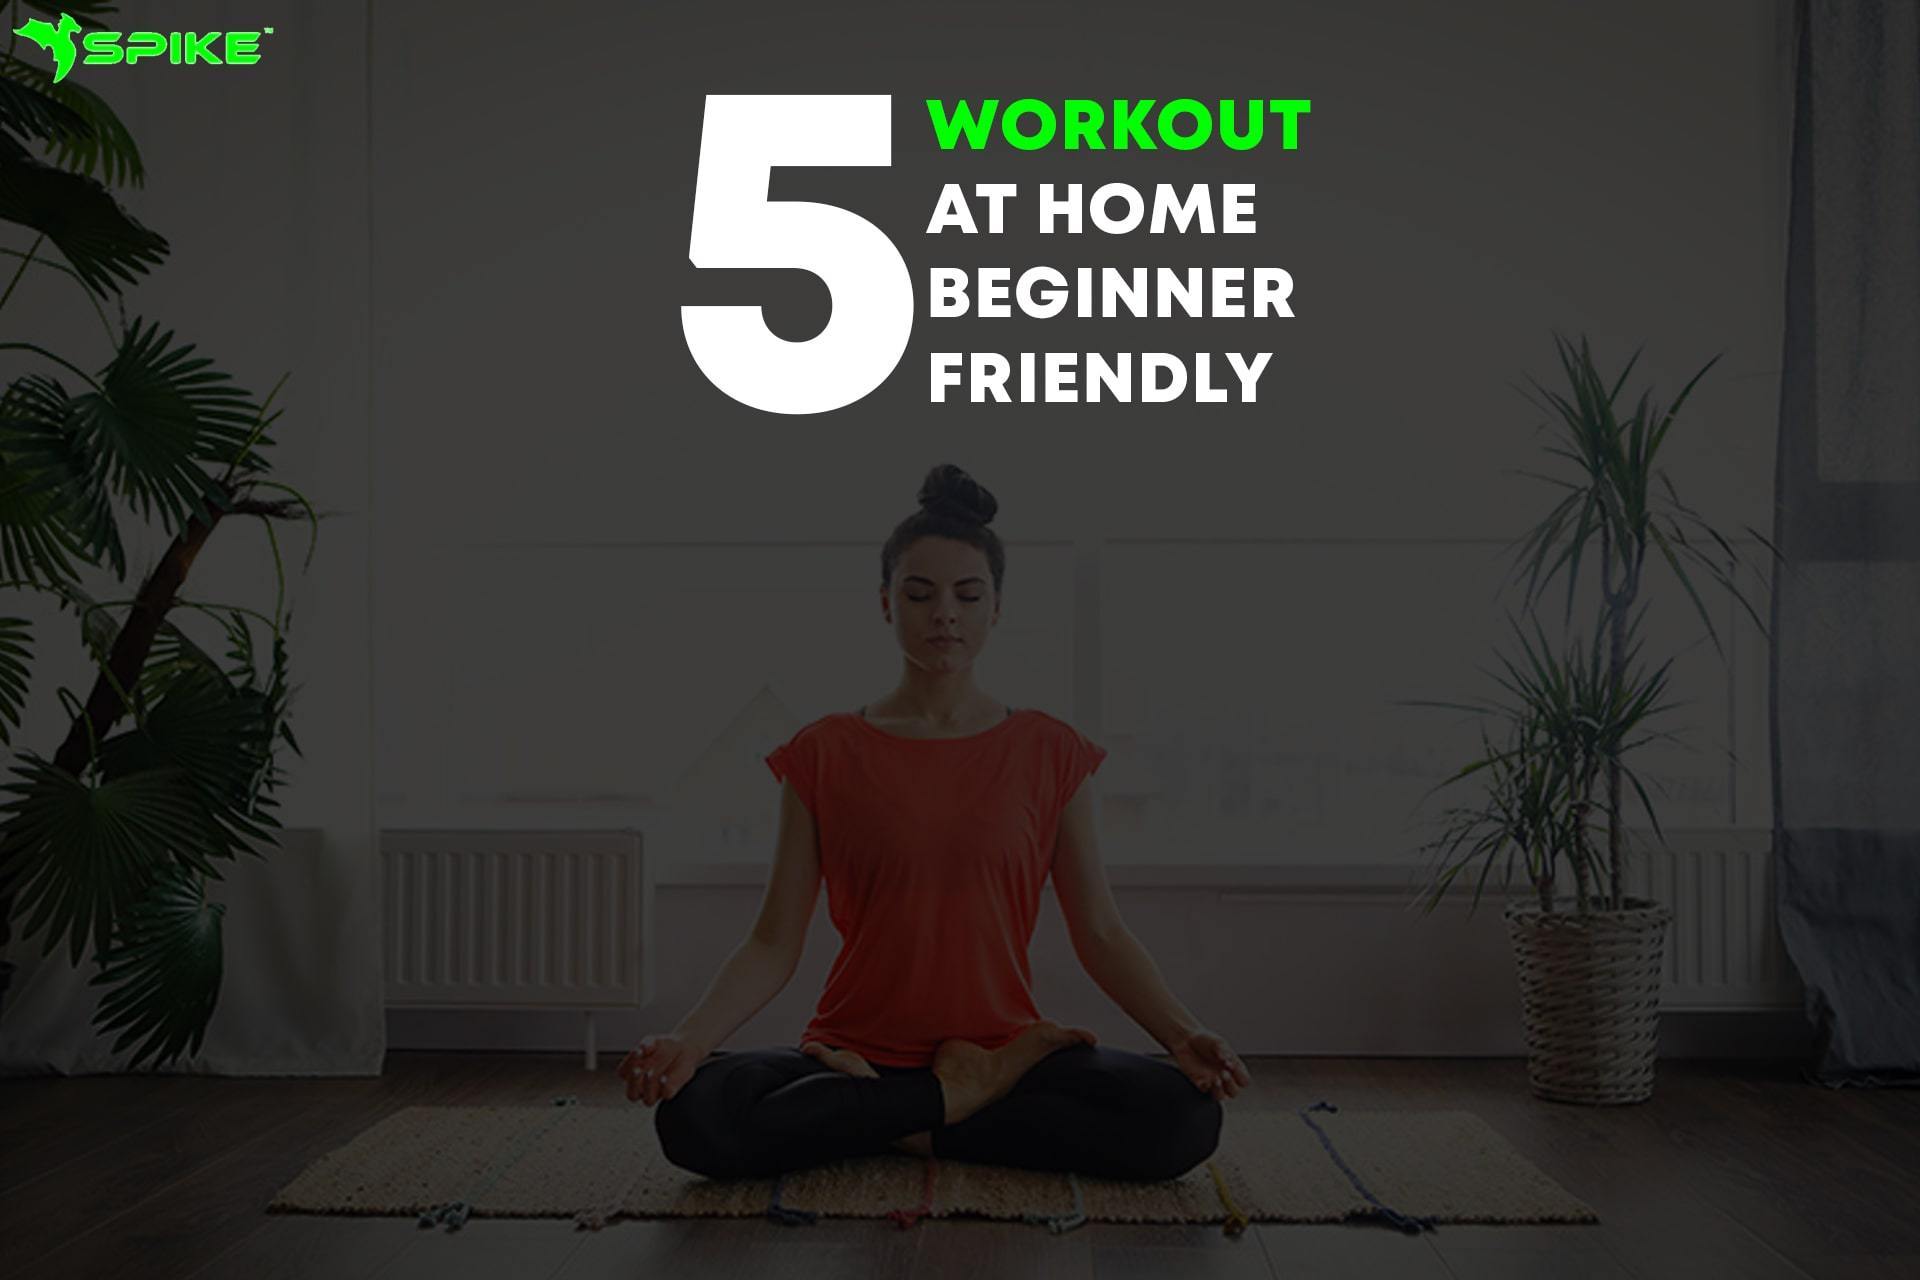 5 Workout At Home Beginner Friendly - Spike